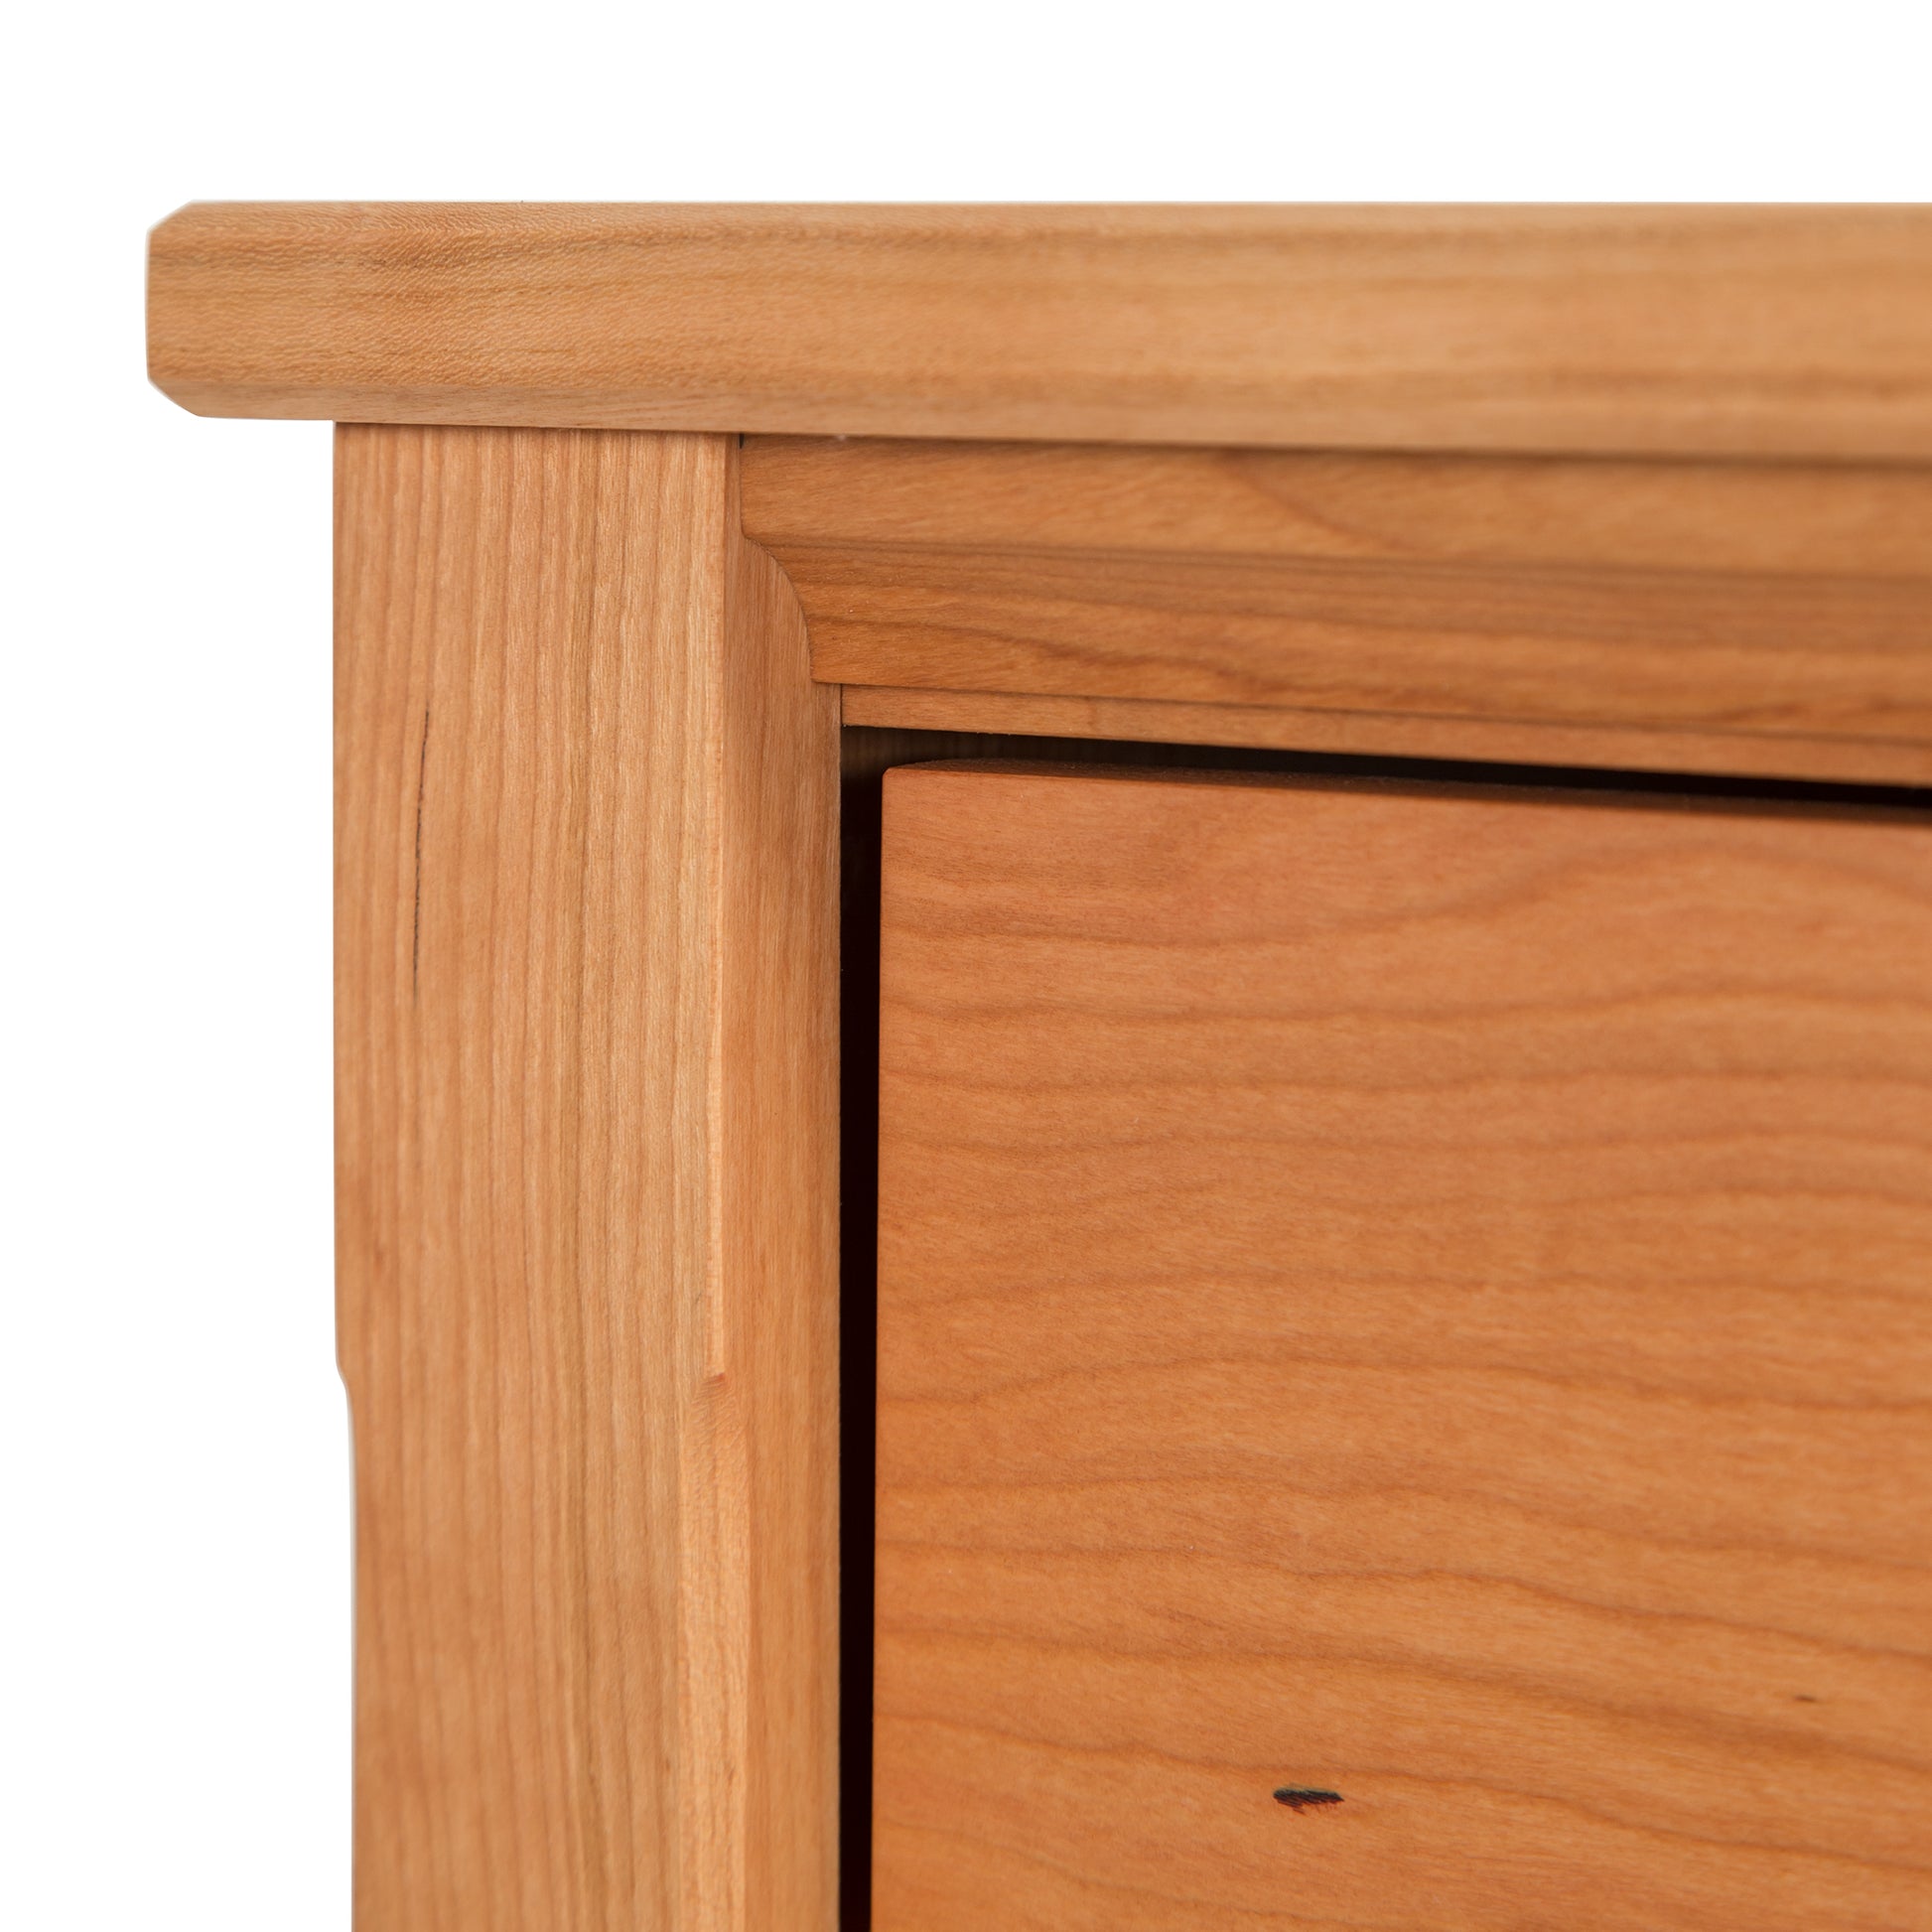 Close-up of a wooden cabinet corner showing the joint of a Maple Corner Woodworks Vermont Shaker 1-Drawer Enclosed Shelf Nightstand frame and panel, highlighting the natural cherry wood grain and smooth finish.